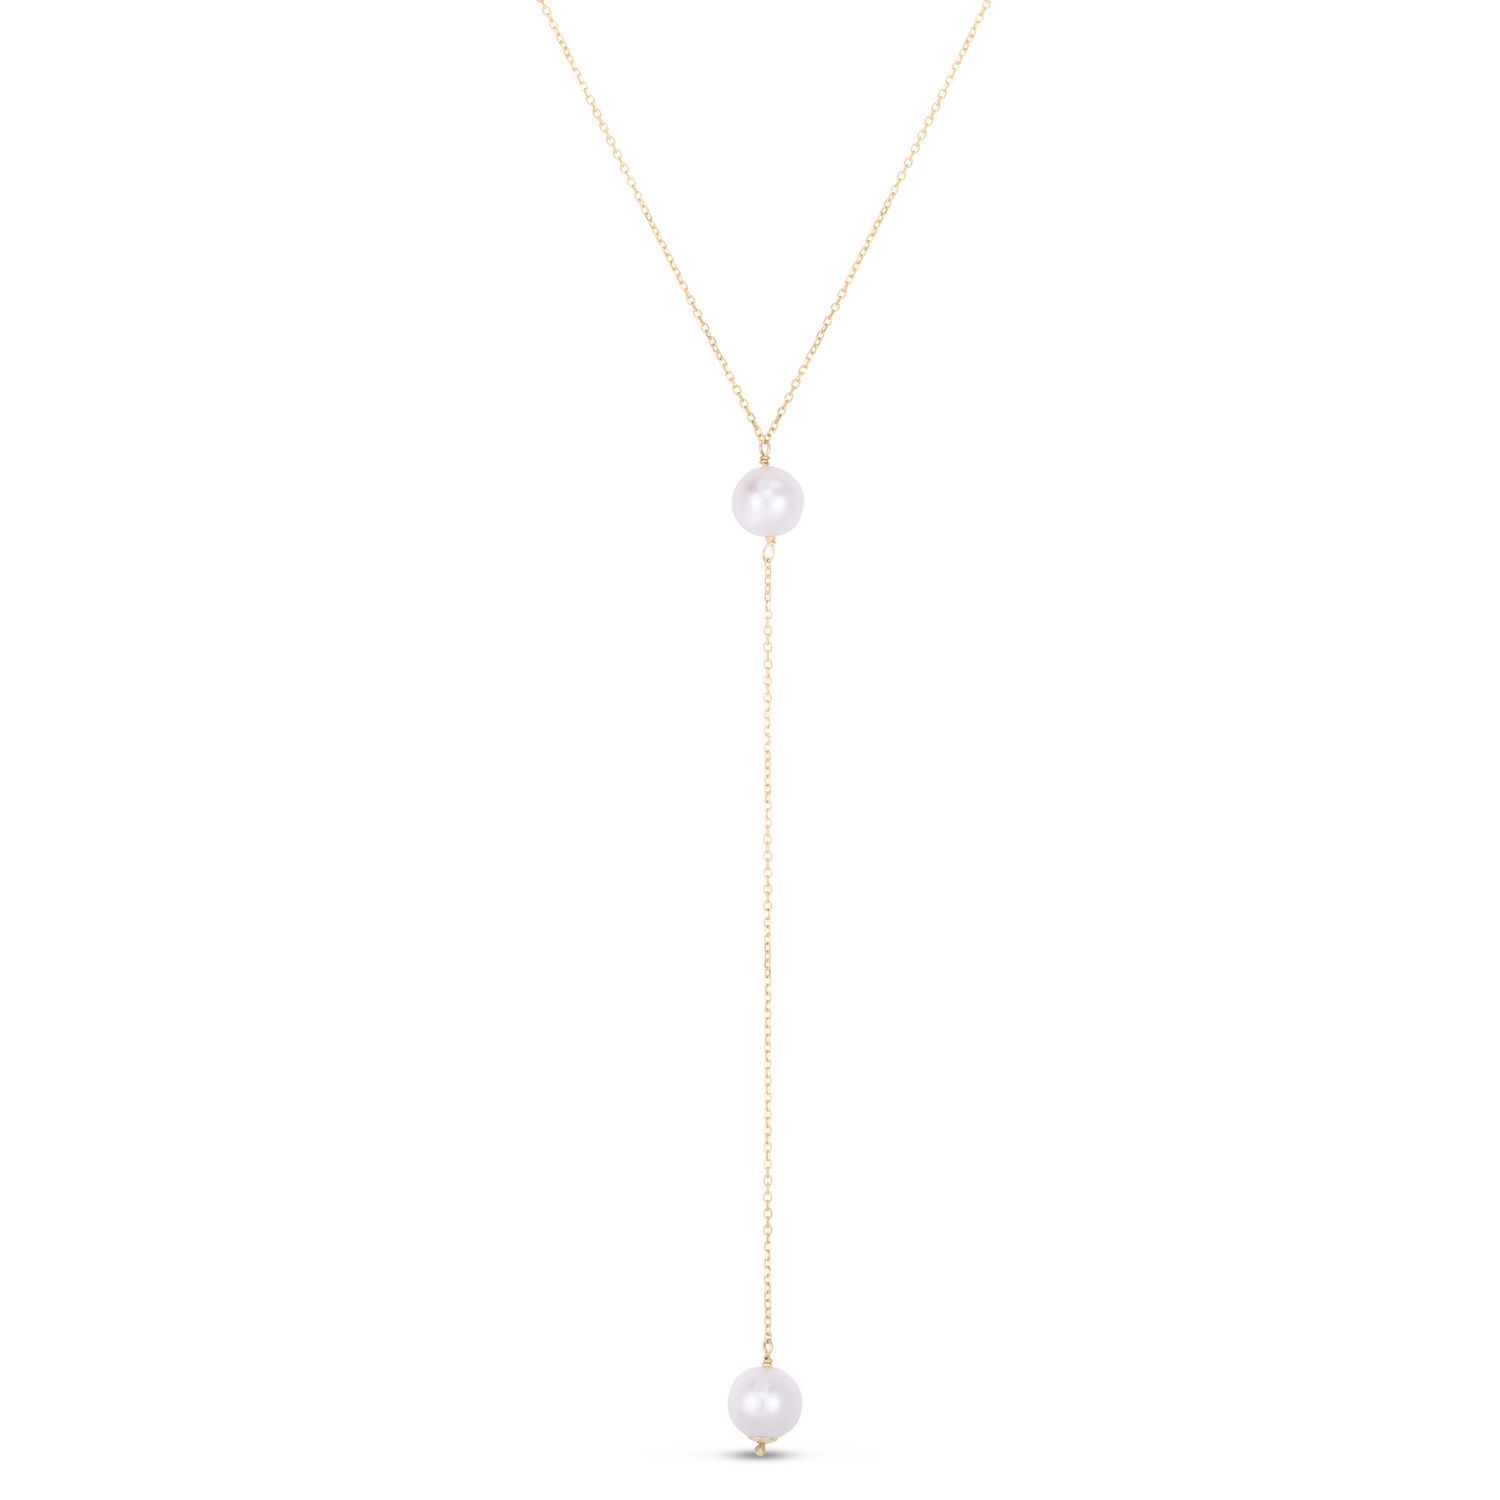 14K Yellow Gold .5mm Cable Chain Necklace 17" Cultured Pearl Drop Lariat Pendant